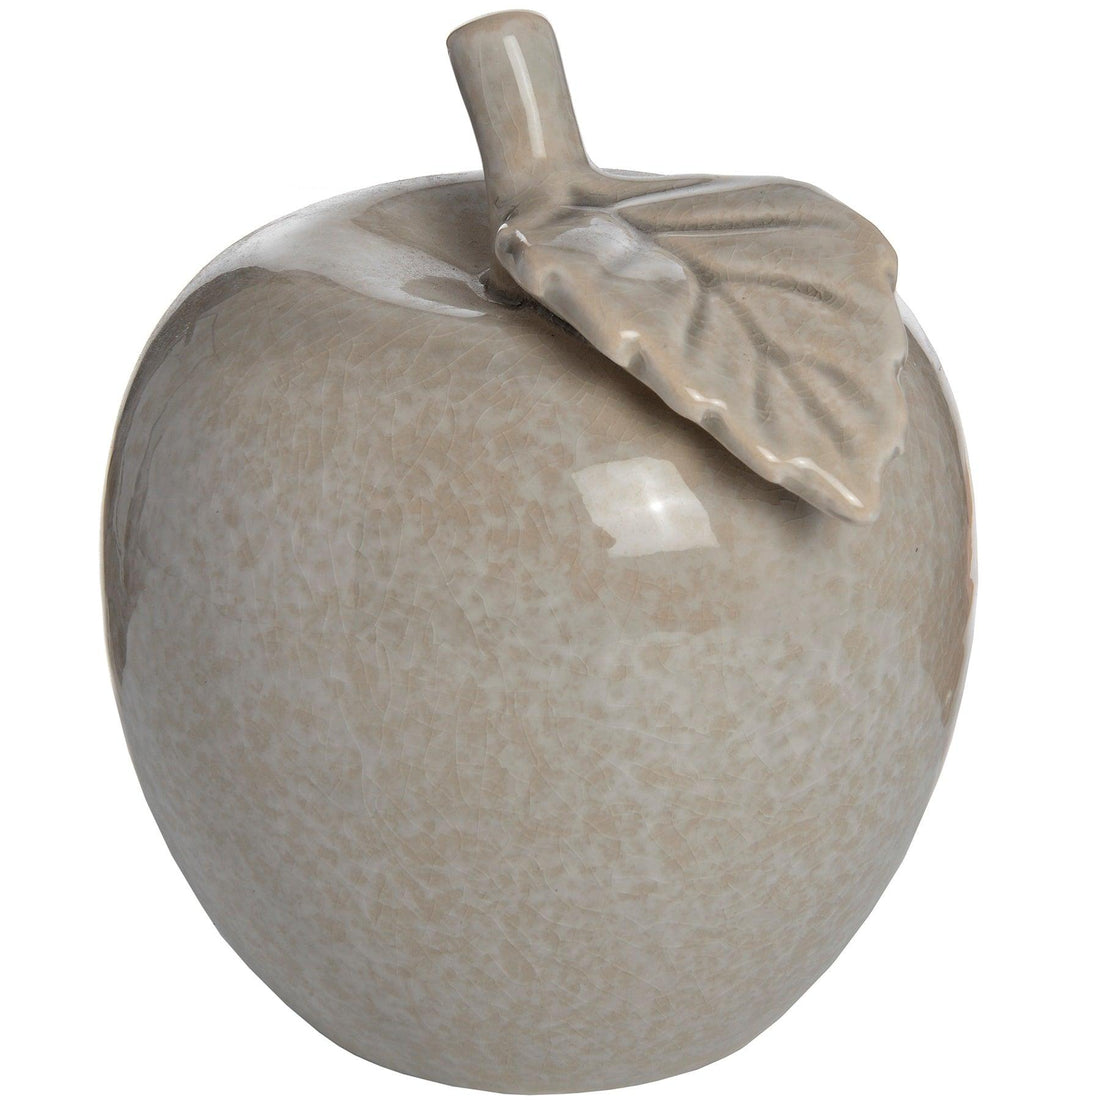 Antique Grey Small Ceramic Apple - £26.95 - Gifts & Accessories > Ornaments 